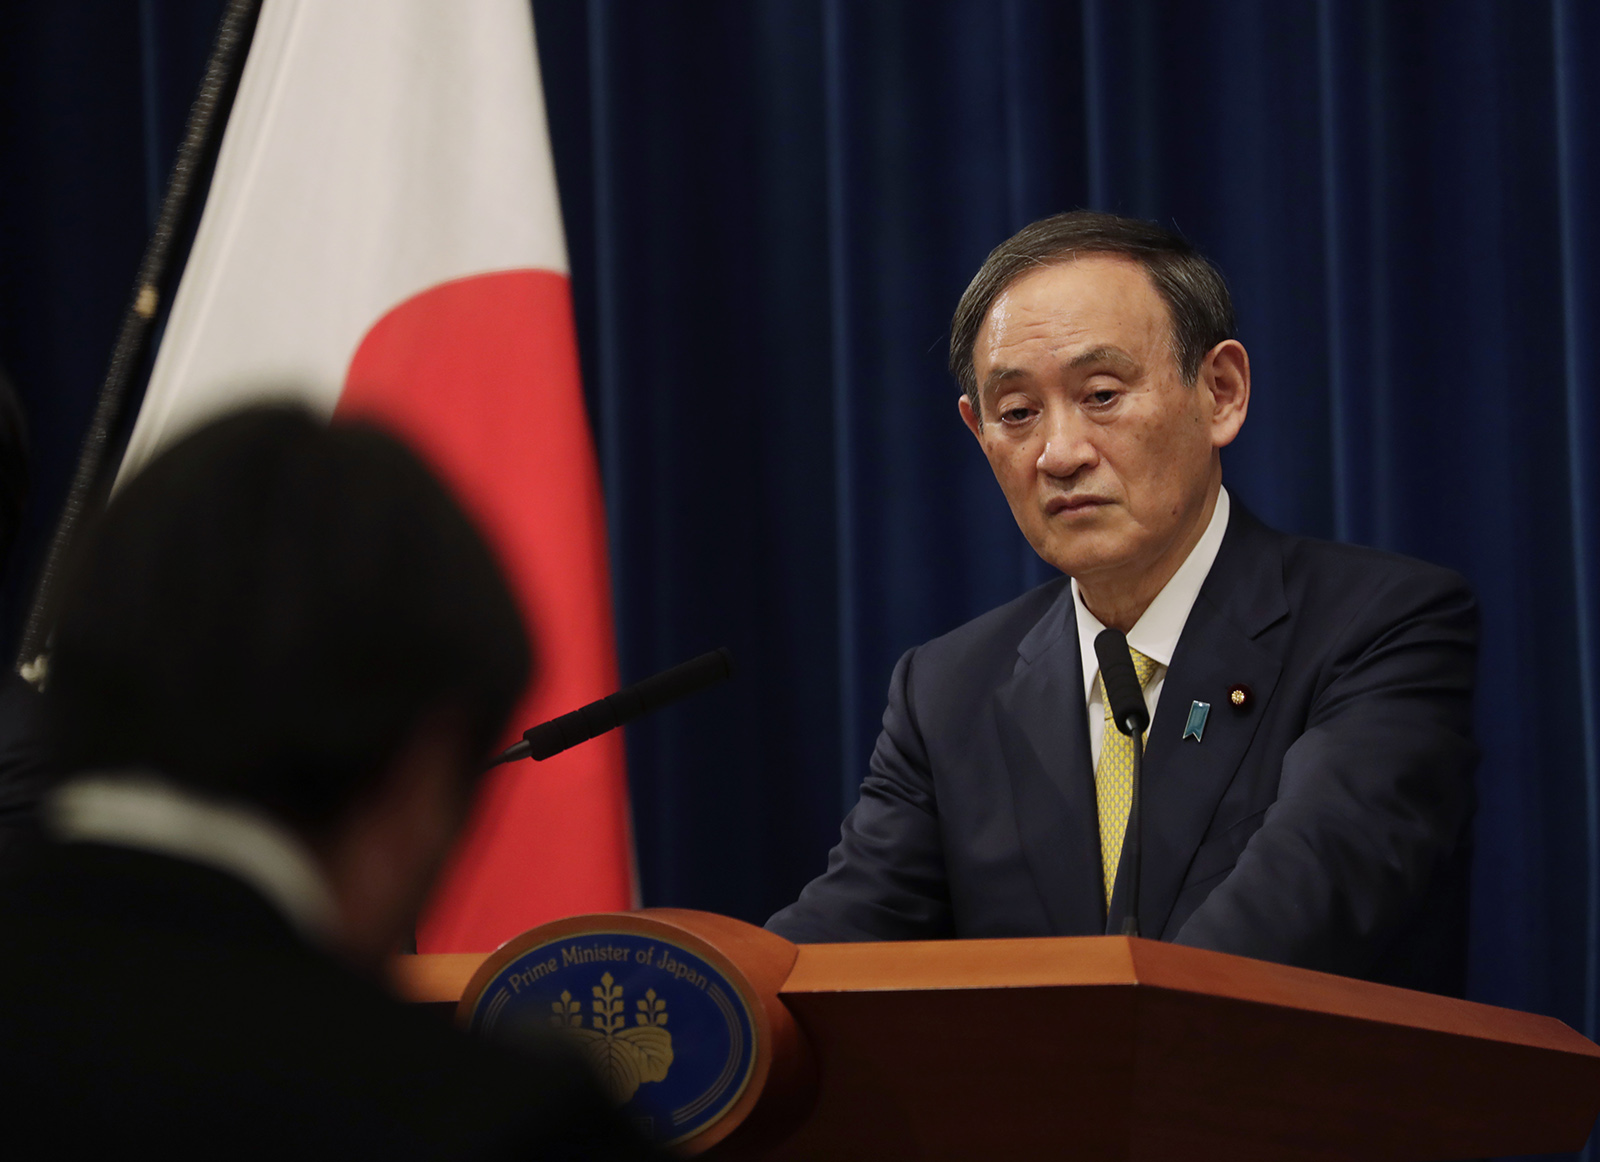 Japanese Prime Minister Yoshihide Suga speaks during a news conference in Tokyo on Friday, December 4.